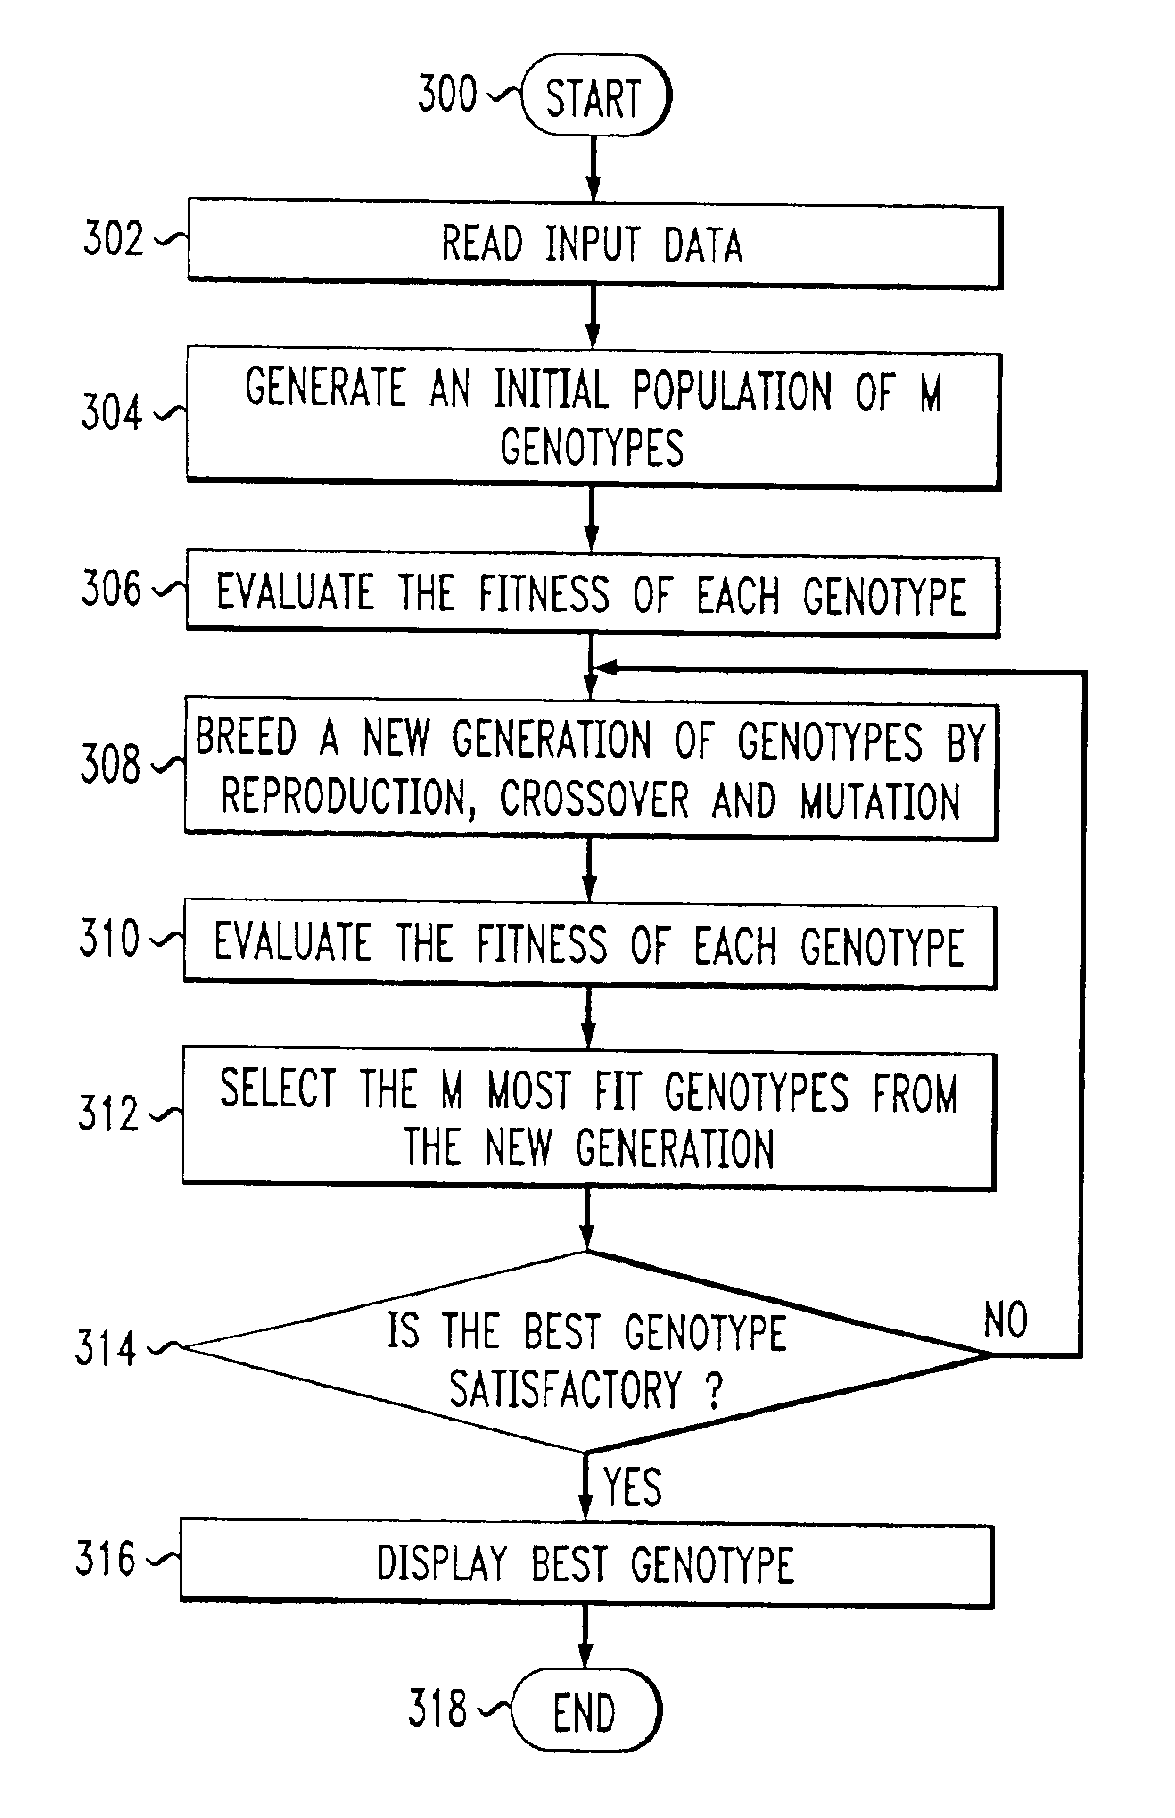 Method for utilizing a generic algorithm to provide constraint-based routing of packets in a communication network